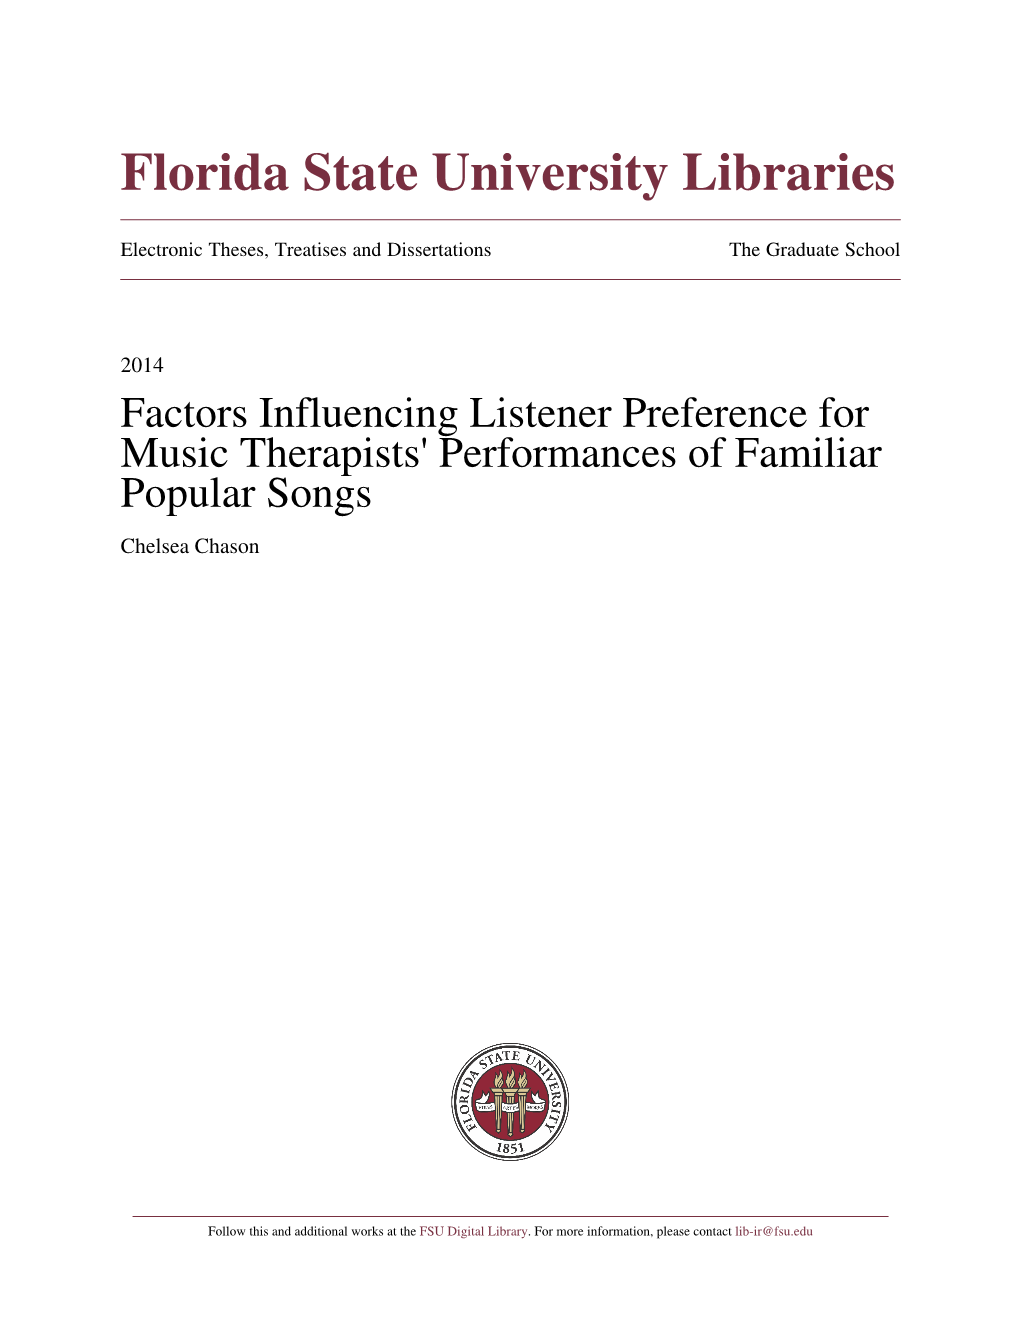 Factors Influencing Listener Preference for Music Therapistsâ•Ž